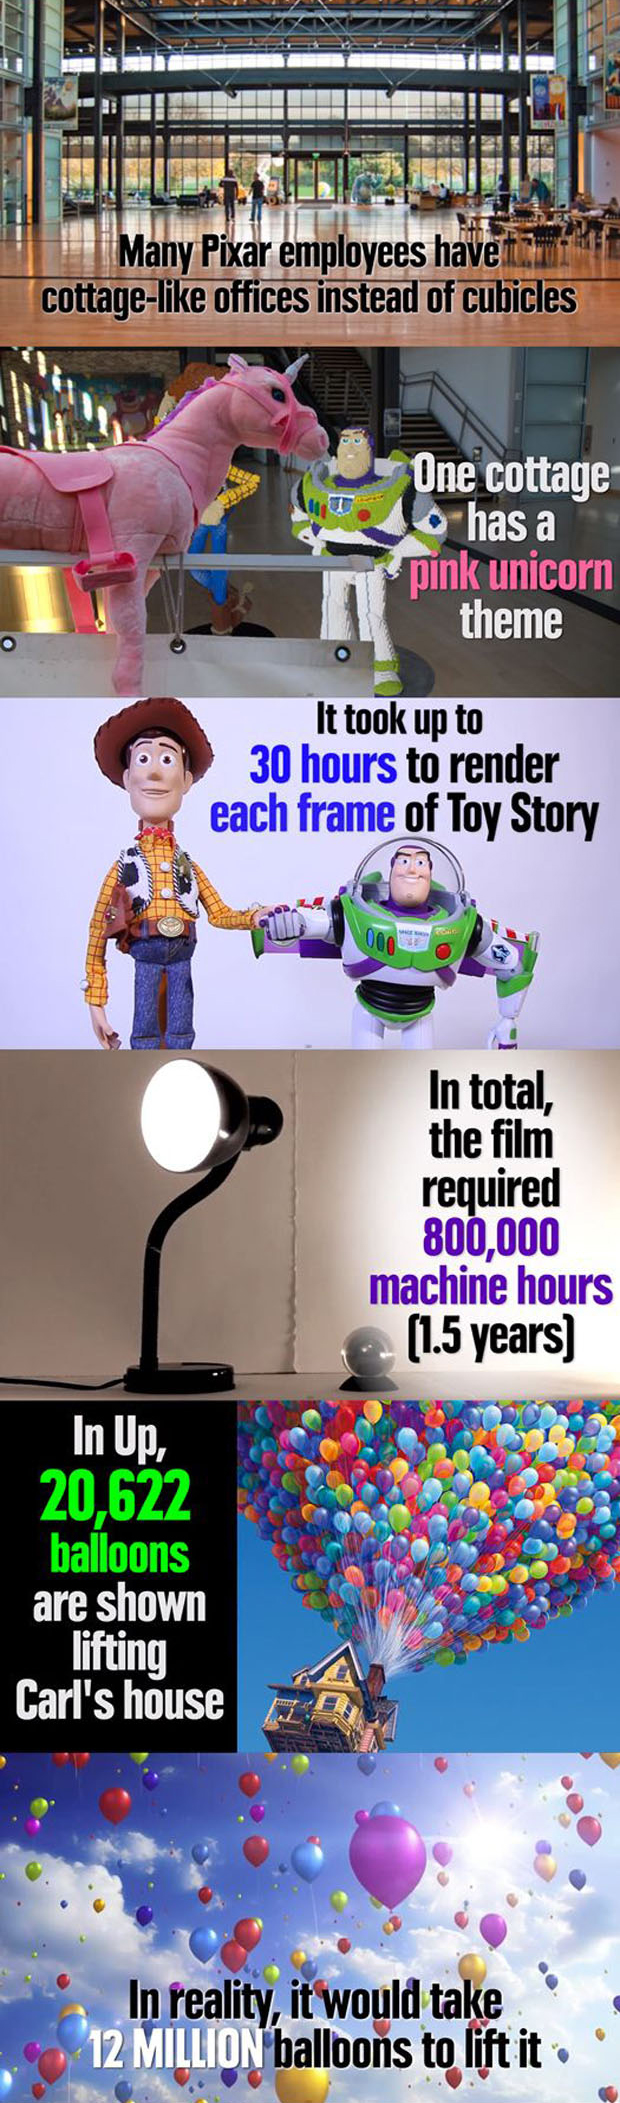 fun and interesting facts about pixar movies